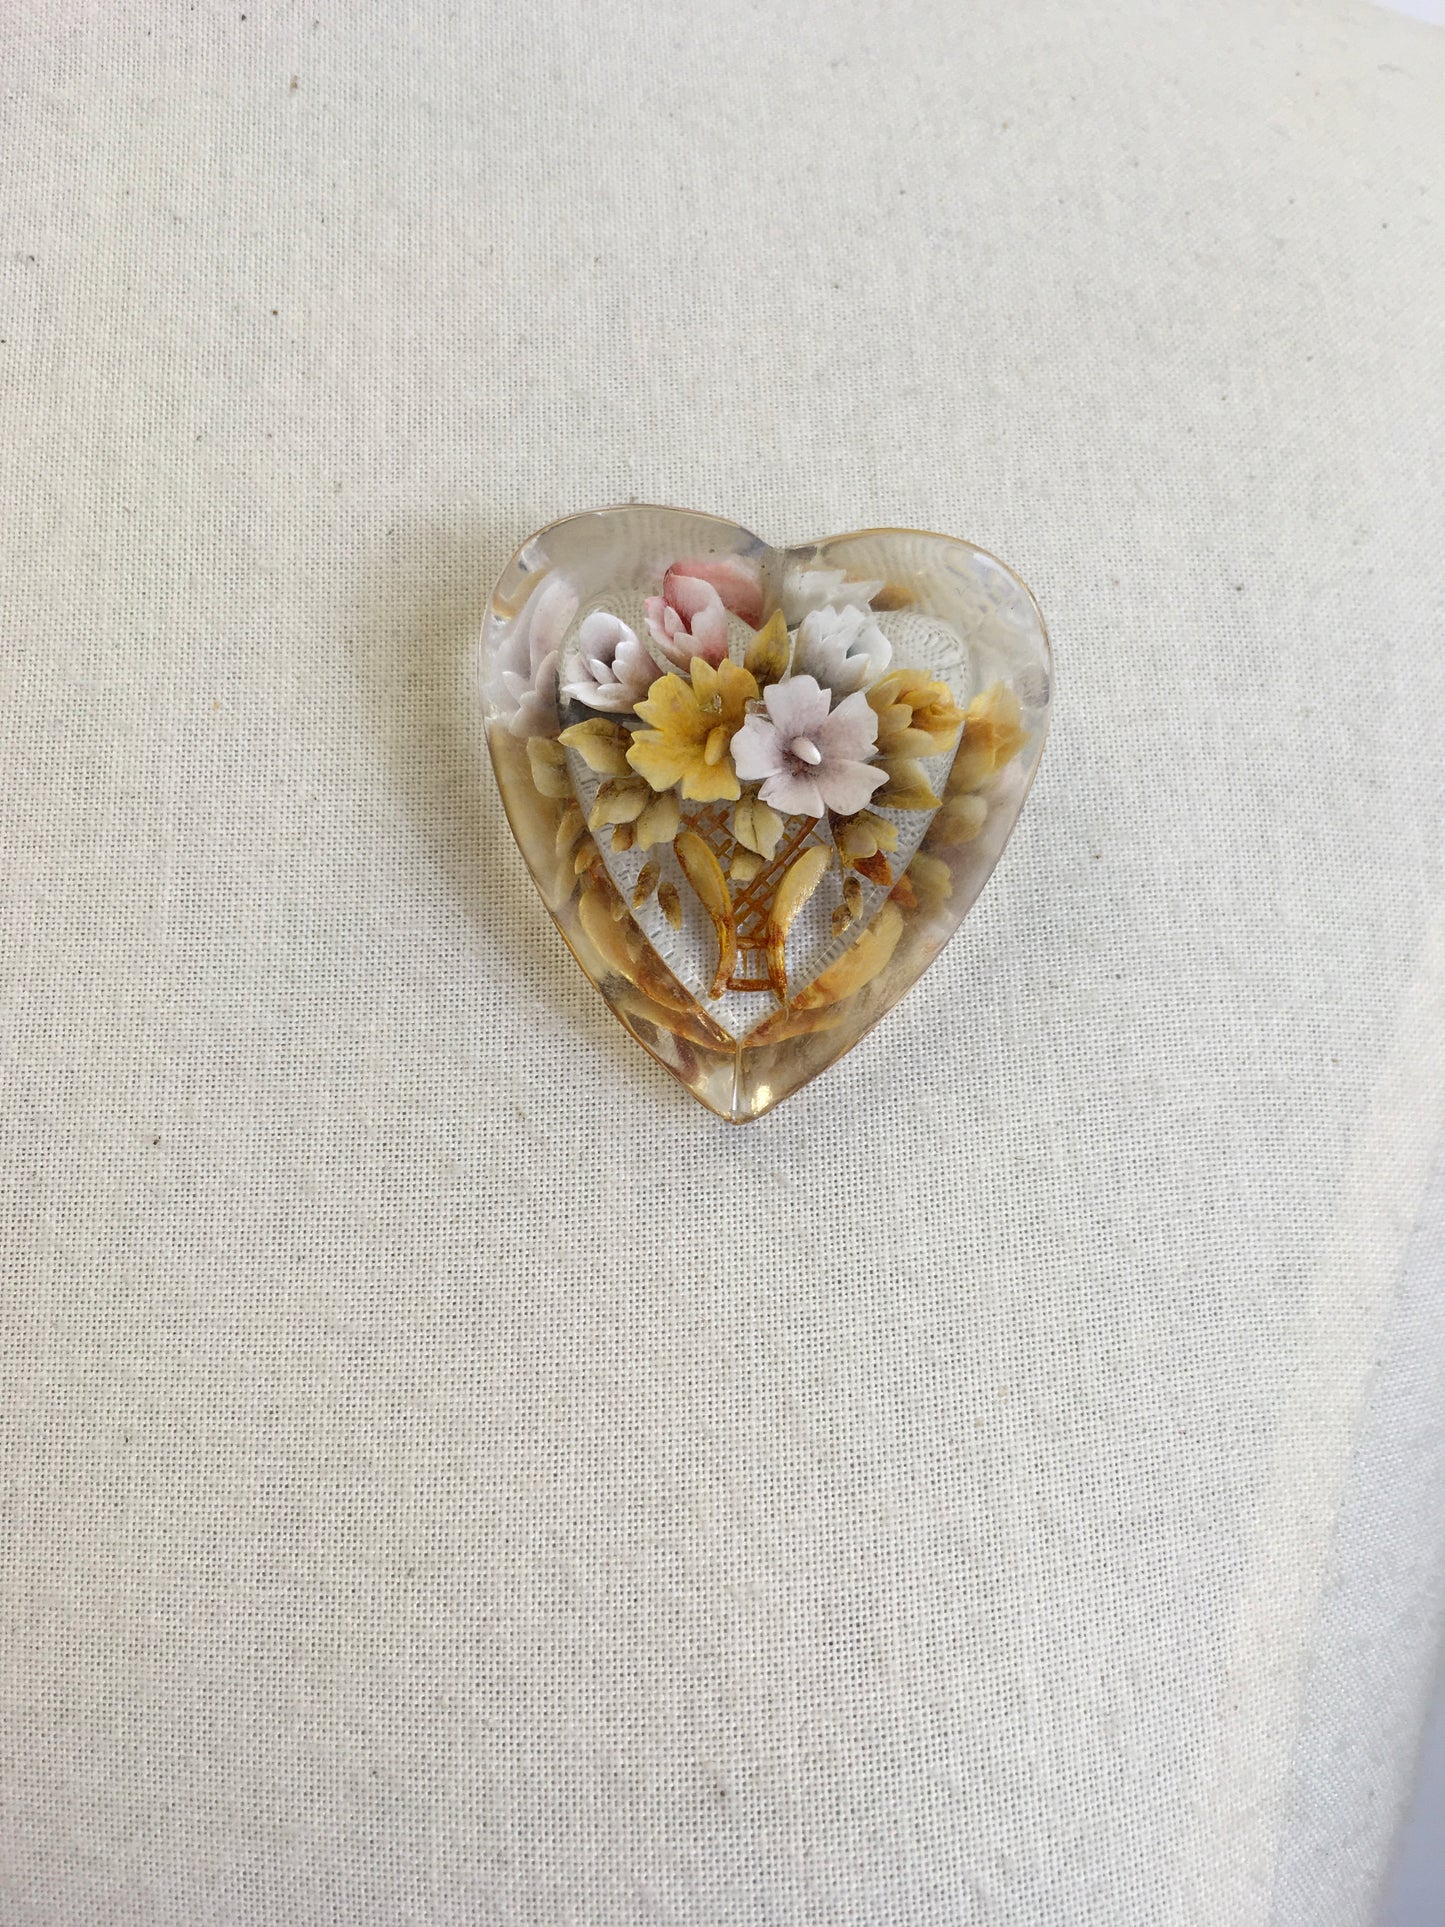 Original late 1940’s early 1950s Lucite Brooch - Heart shaped with a Floral Bouquet